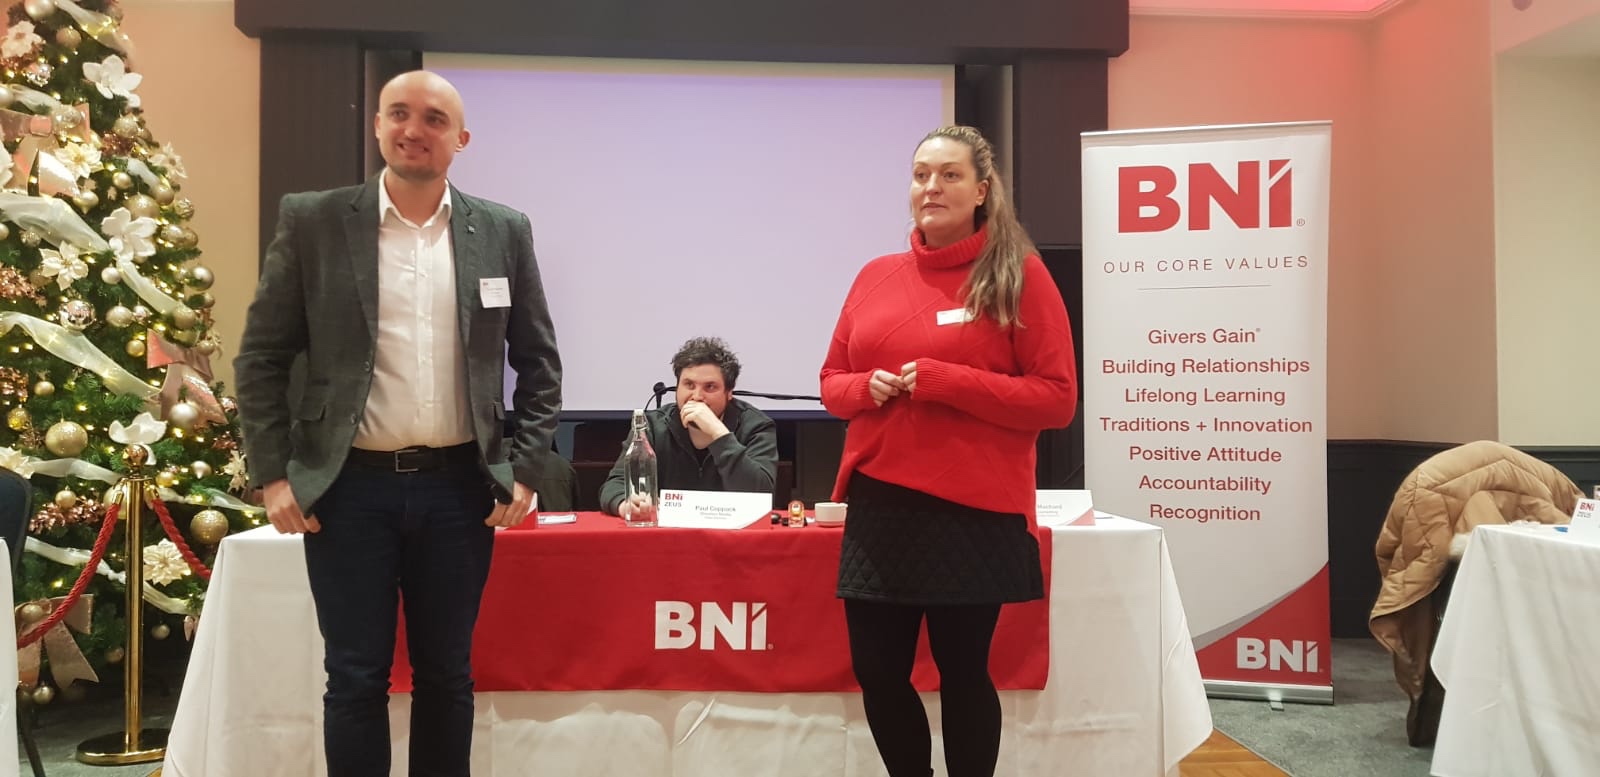 Bowland IT introduces Whalley Home Improvements to BNI